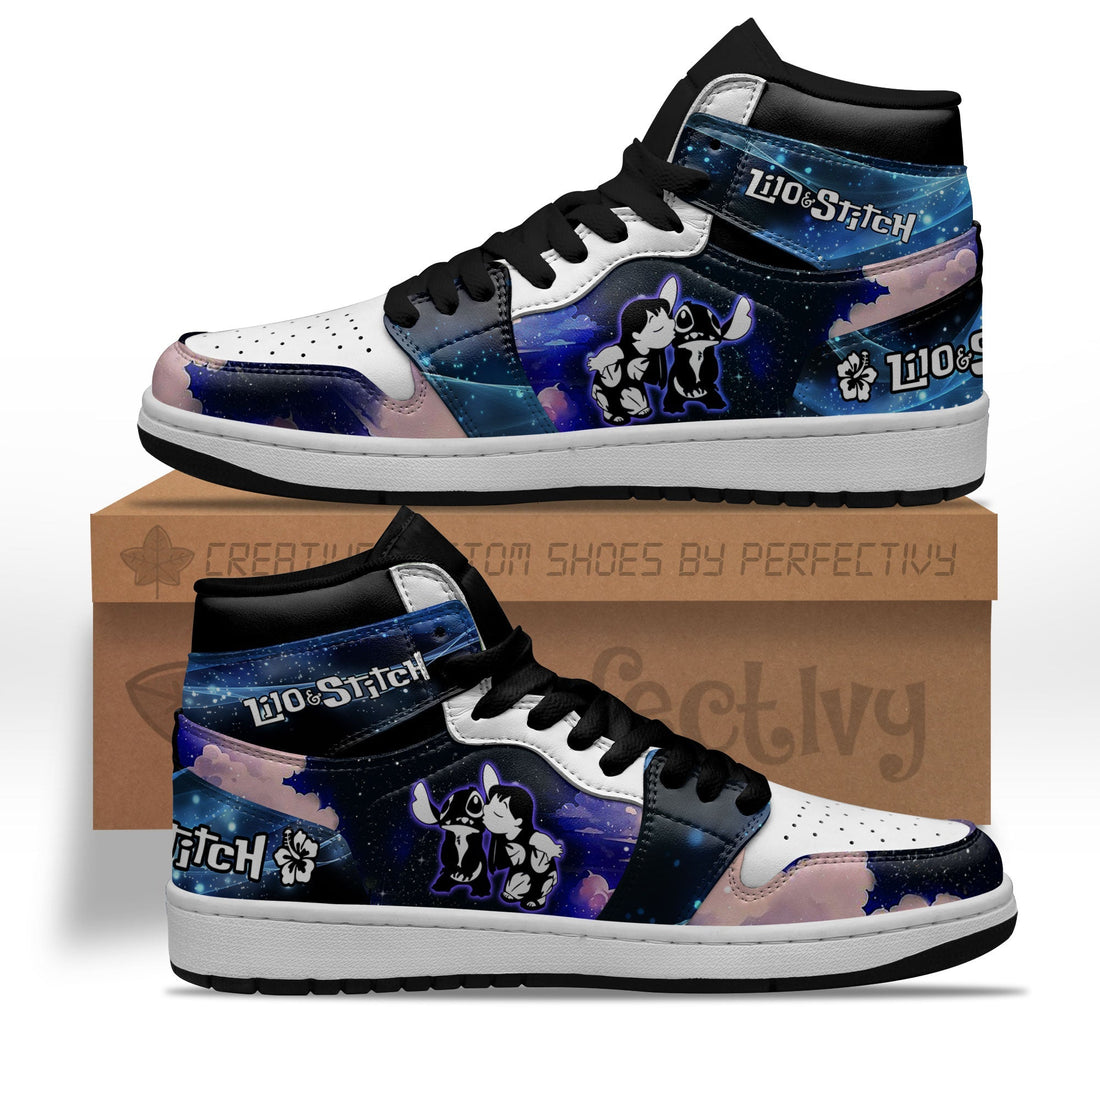 Lilo and Stitch Silhouette J1 Shoes Custom For Fans Sneakers PT10-Gear Wanta